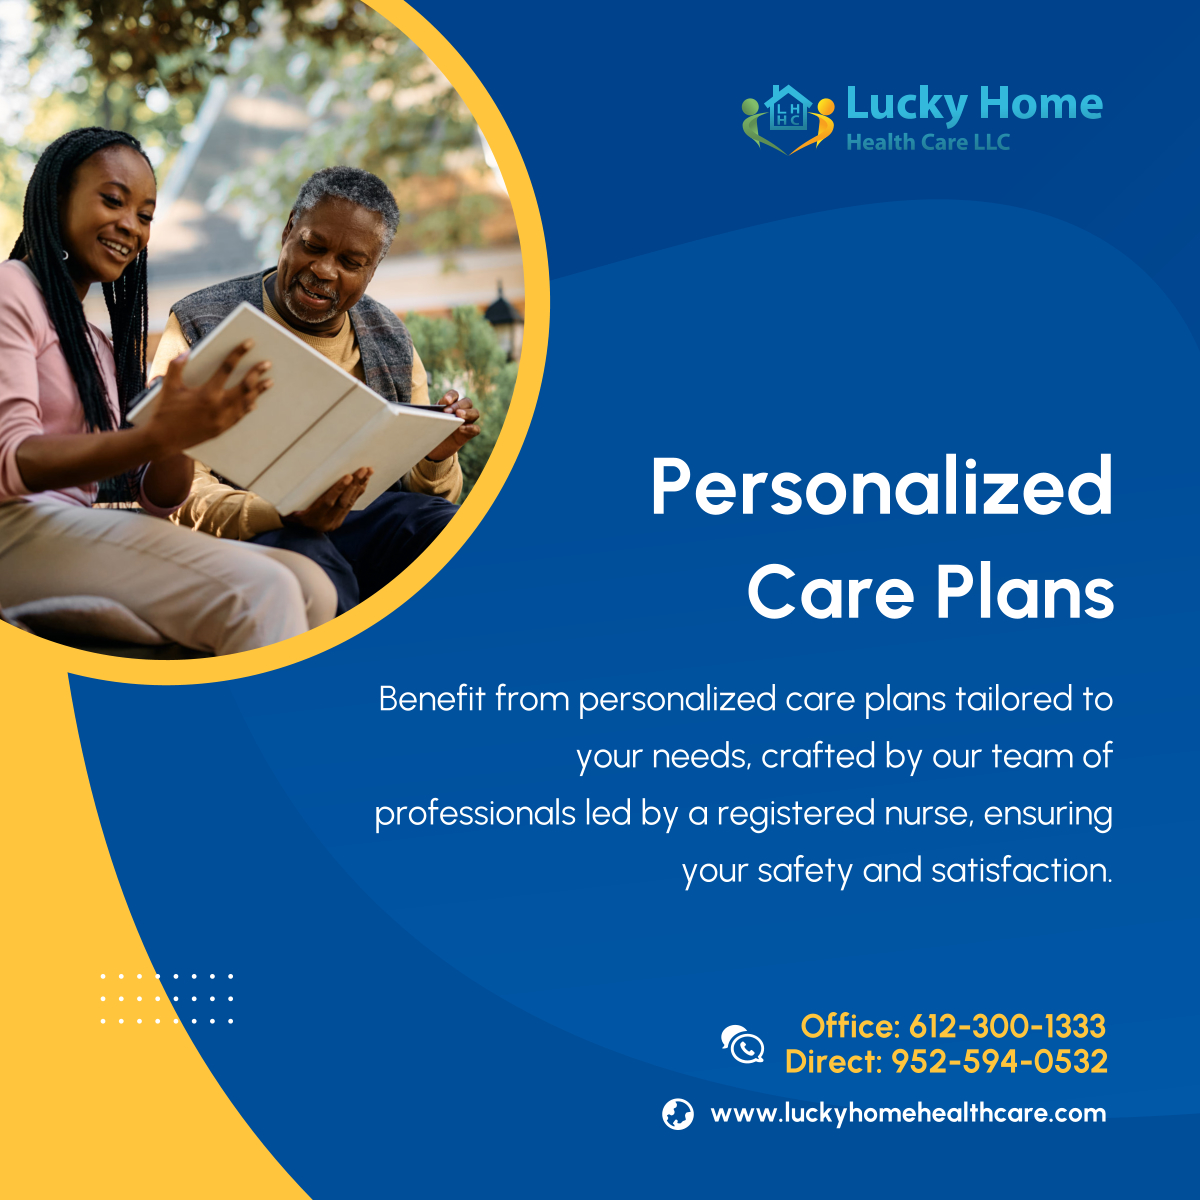 Experience the difference with personalized care plans. Let us provide the support you deserve. Contact us now! 

#MinneapolisMN #HomeHealthCare #PersonalizedCare #CarePlans #ProfessionalSupport